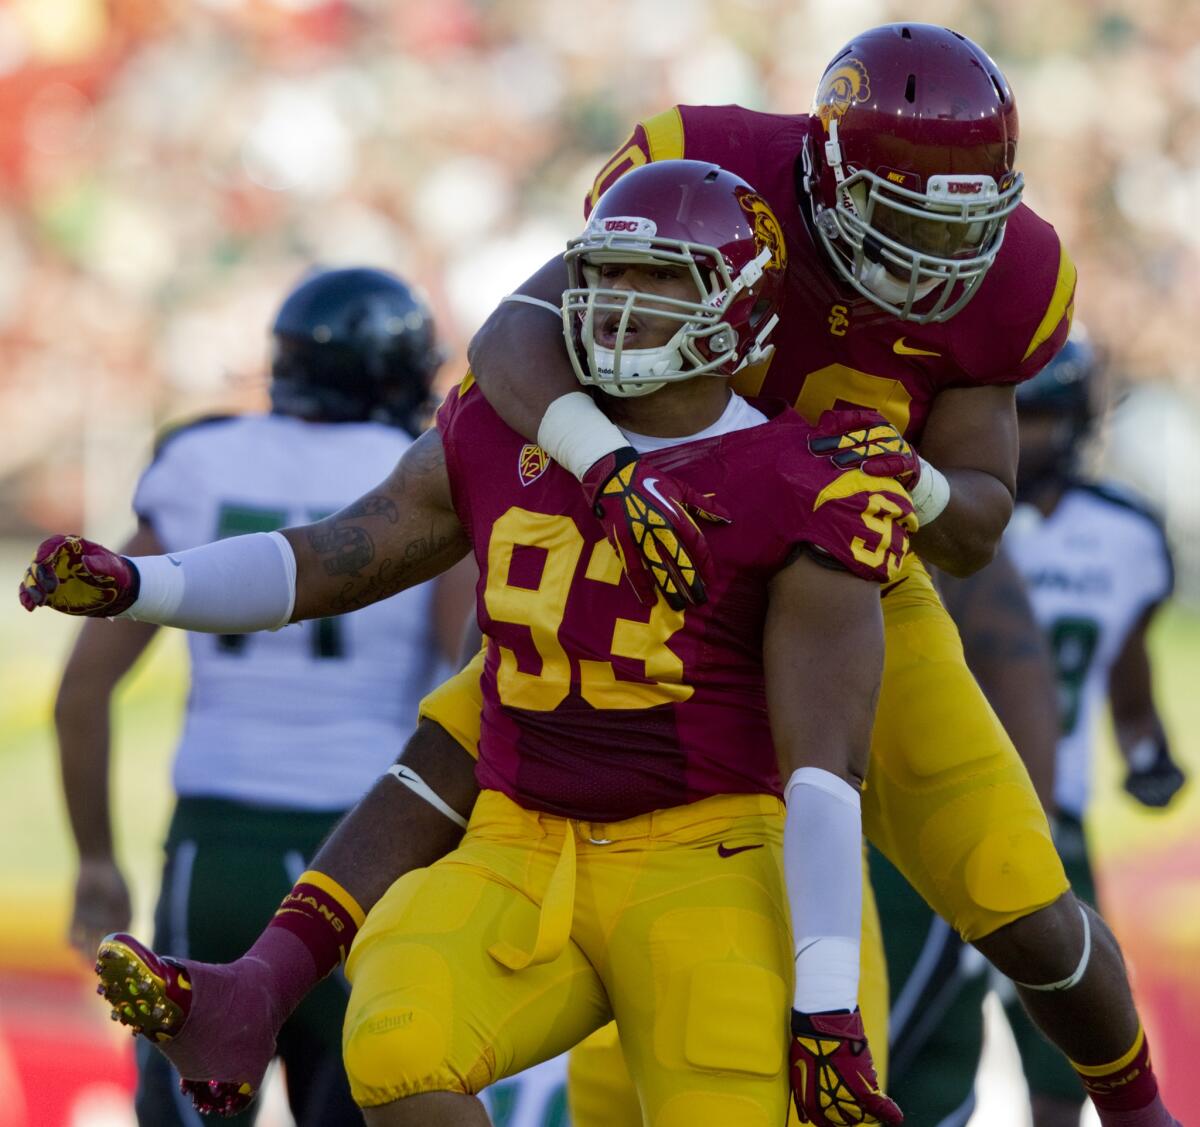 USC defensive end Greg Townsend Jr., bottom, is congratulated by teammate Hayes Pullard after a sack in 2012.